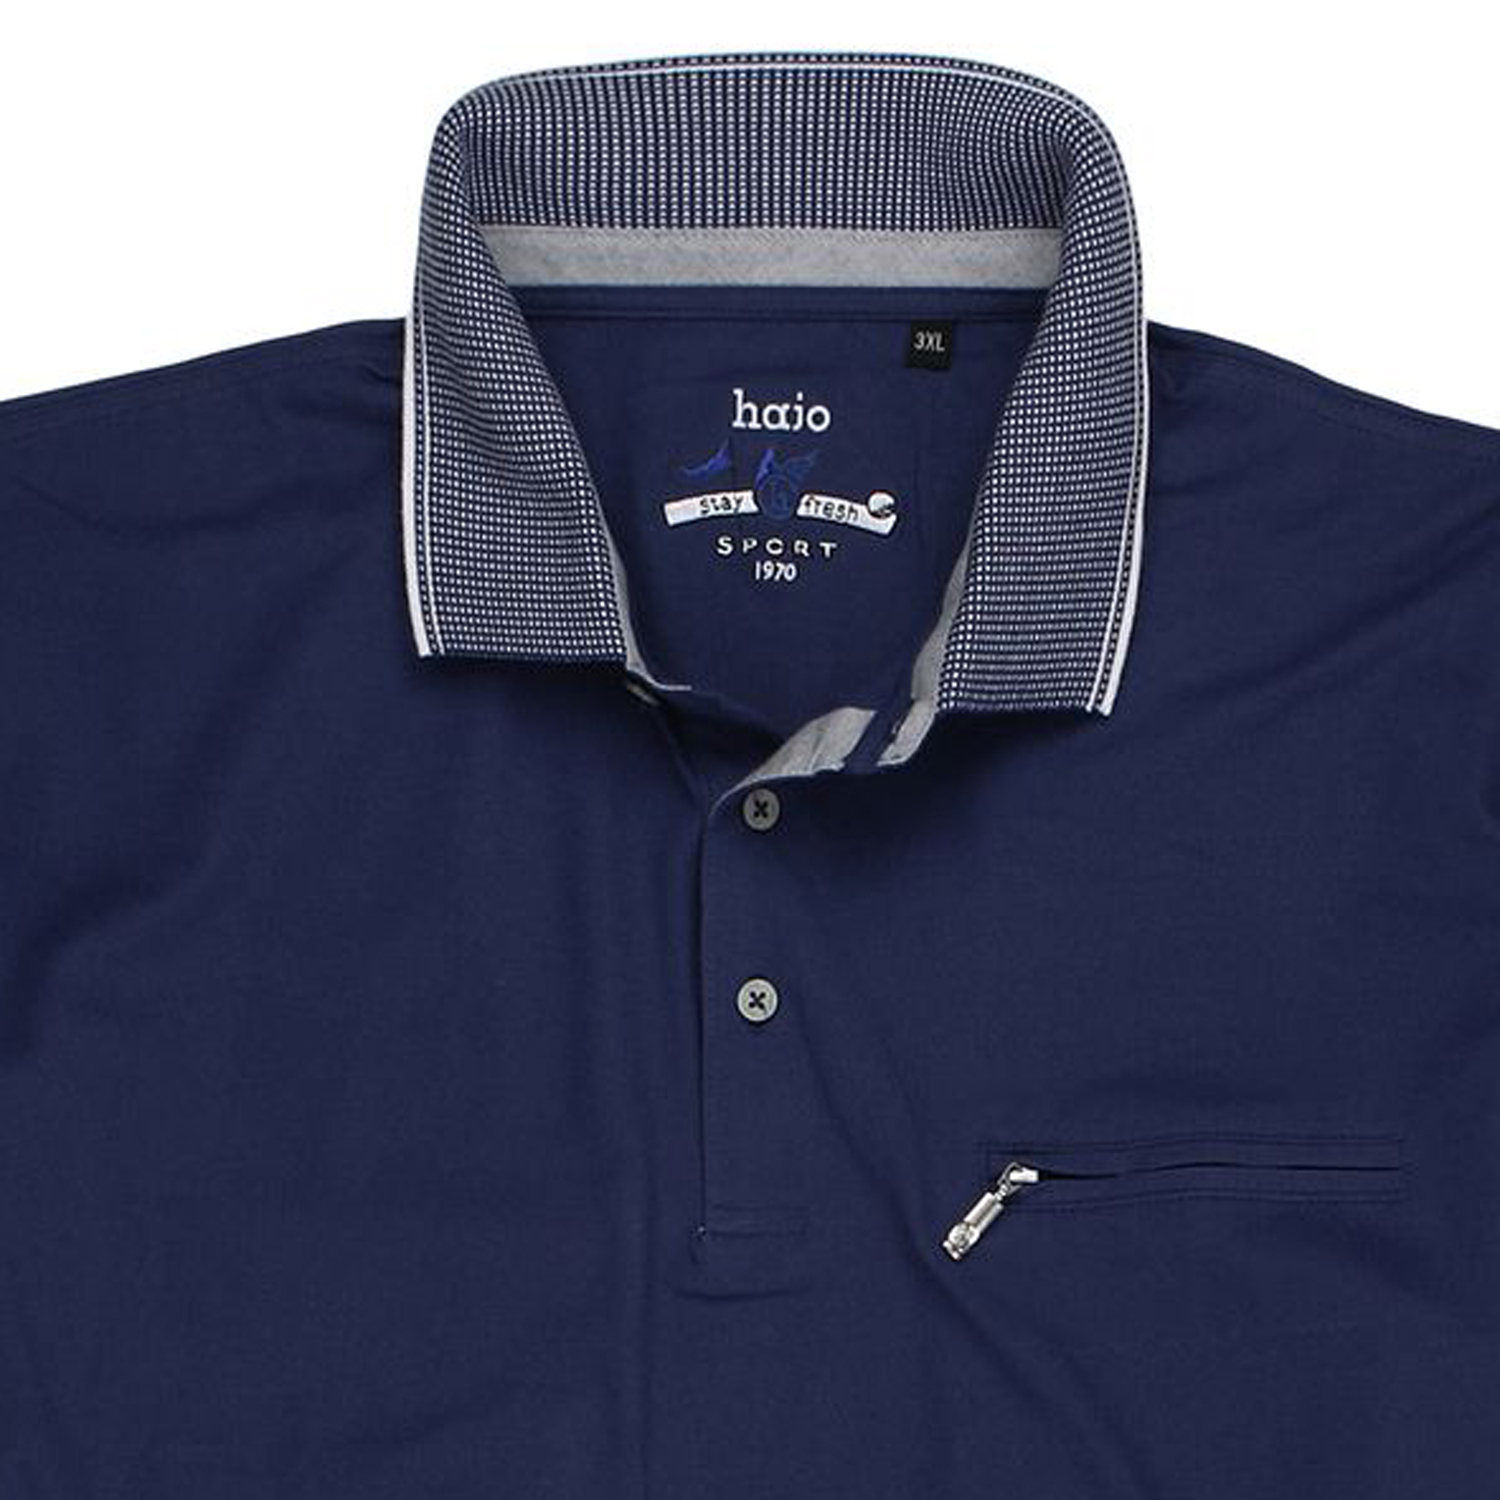 Polo shirt "stay fresh" for men by hajo in navy blue up to oversize 6XL